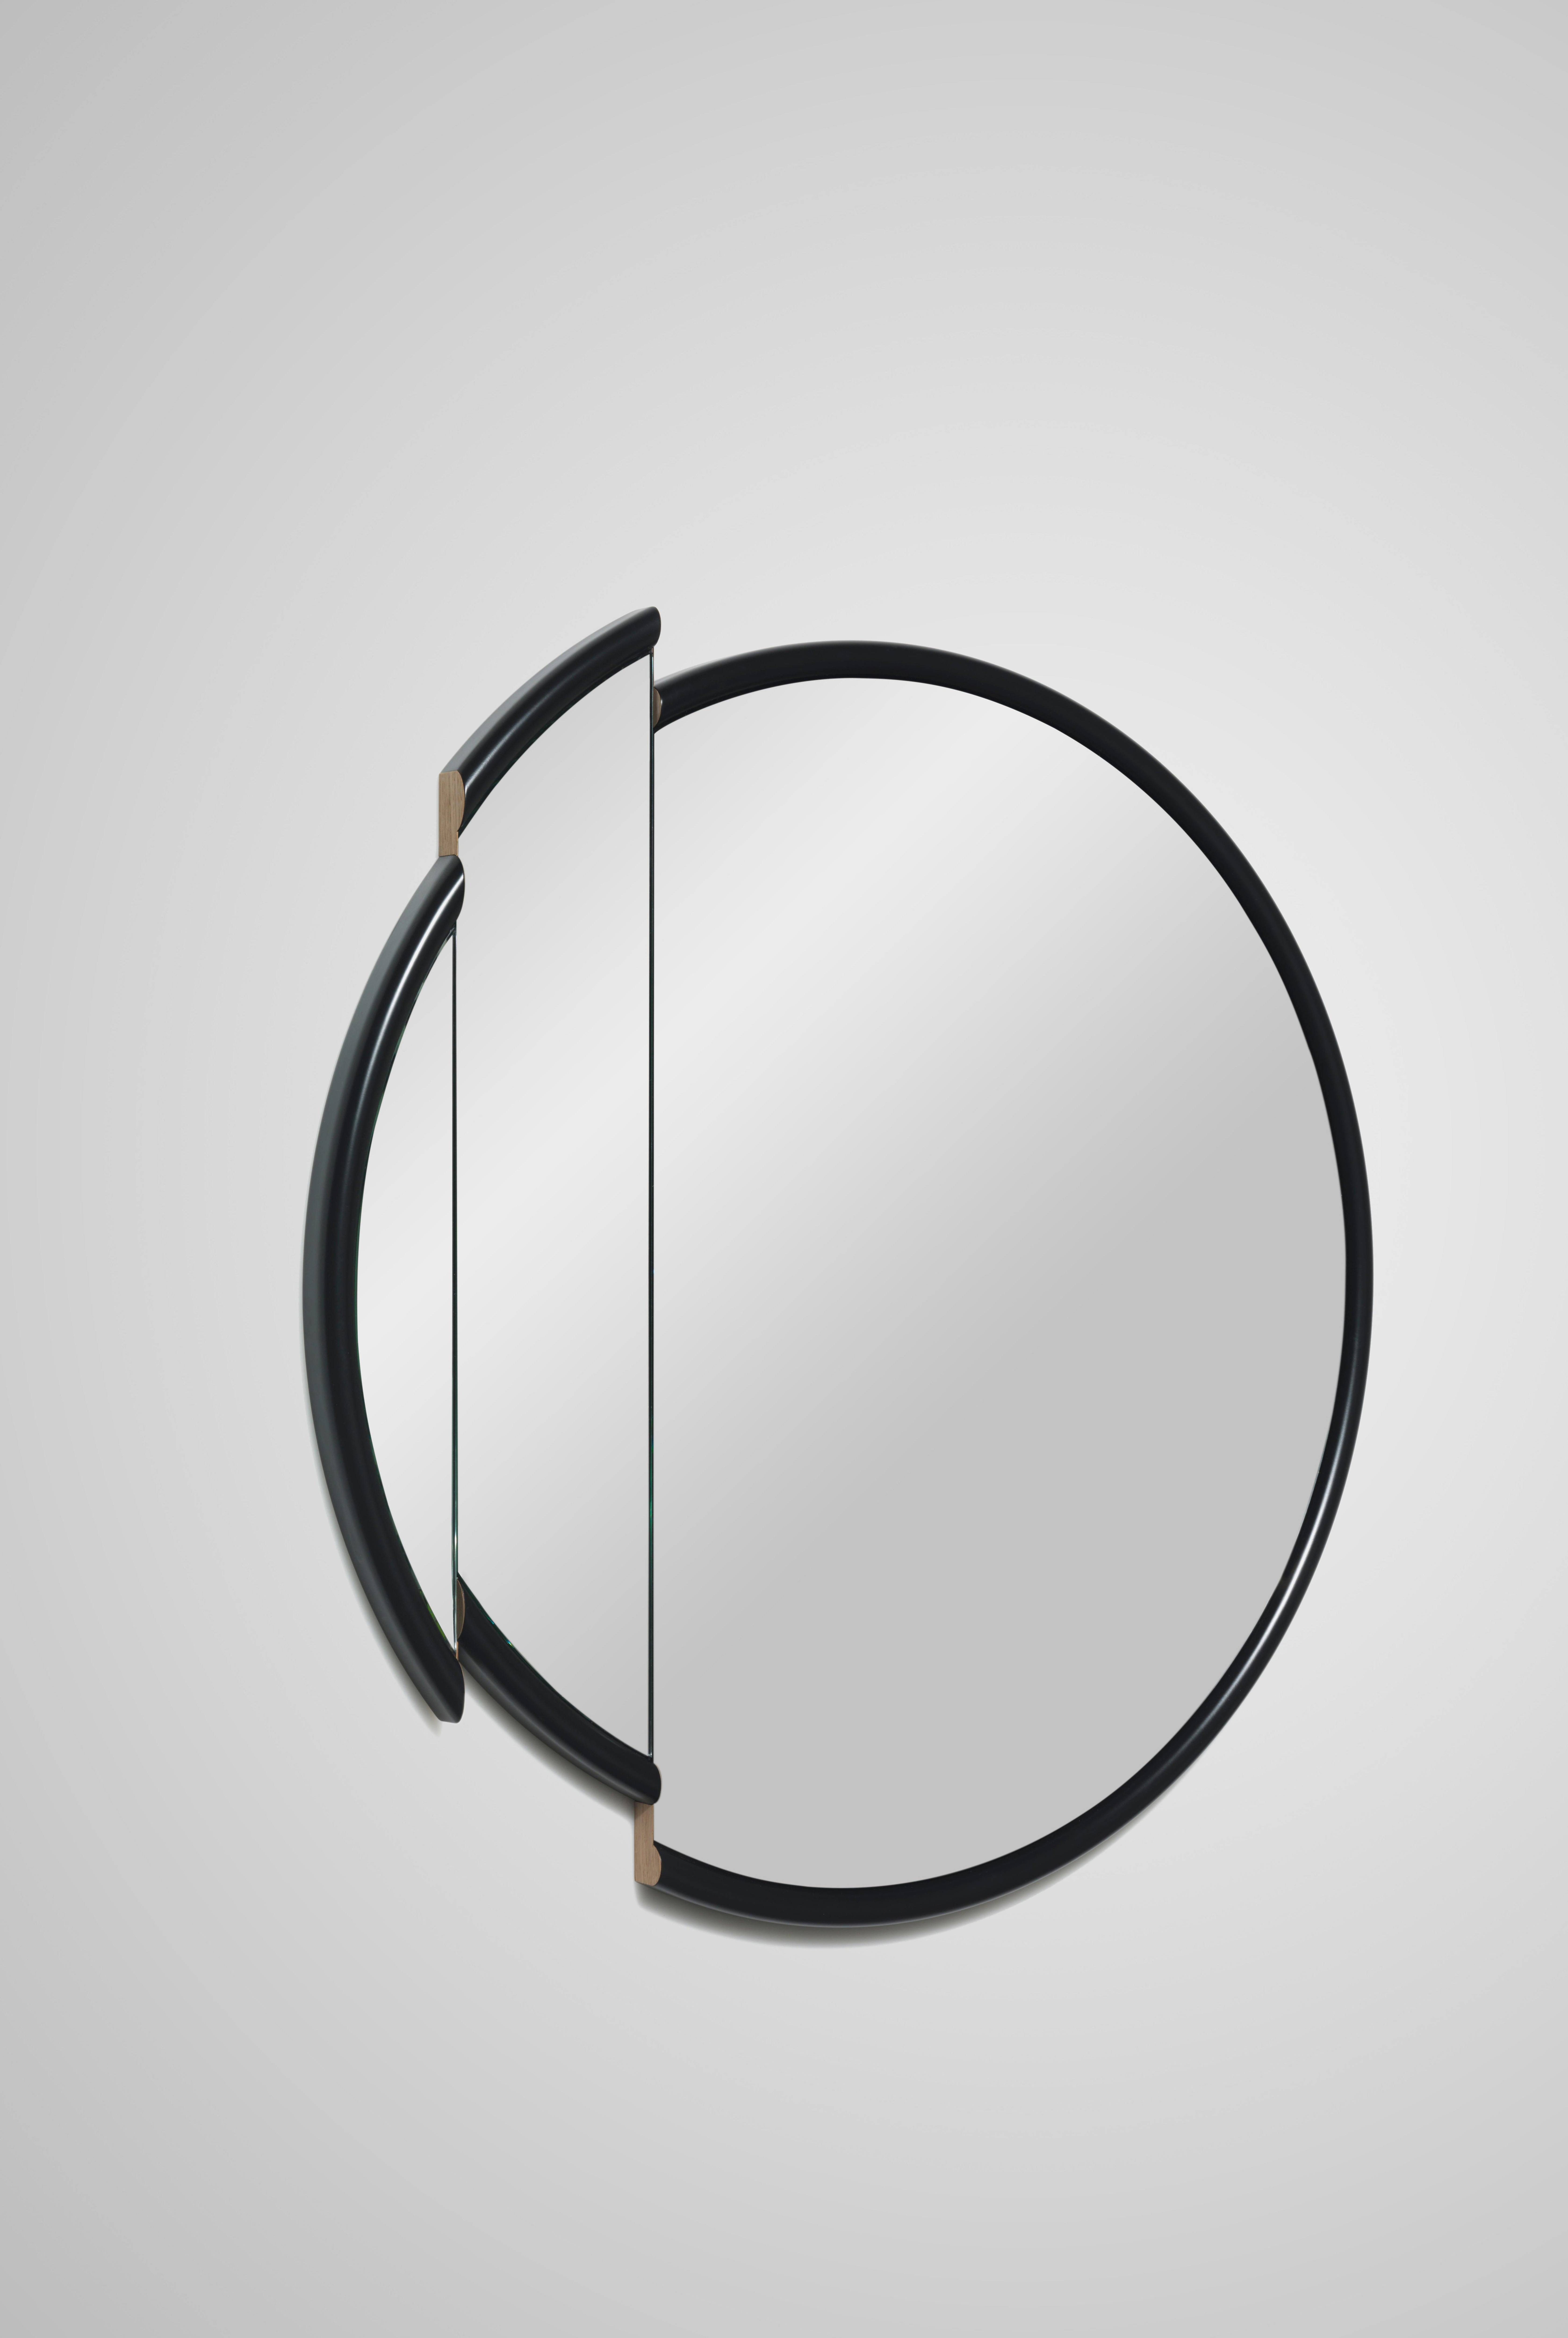 Lee Broom - SPLIT MIRROR ROUND In New Condition For Sale In New York, NY